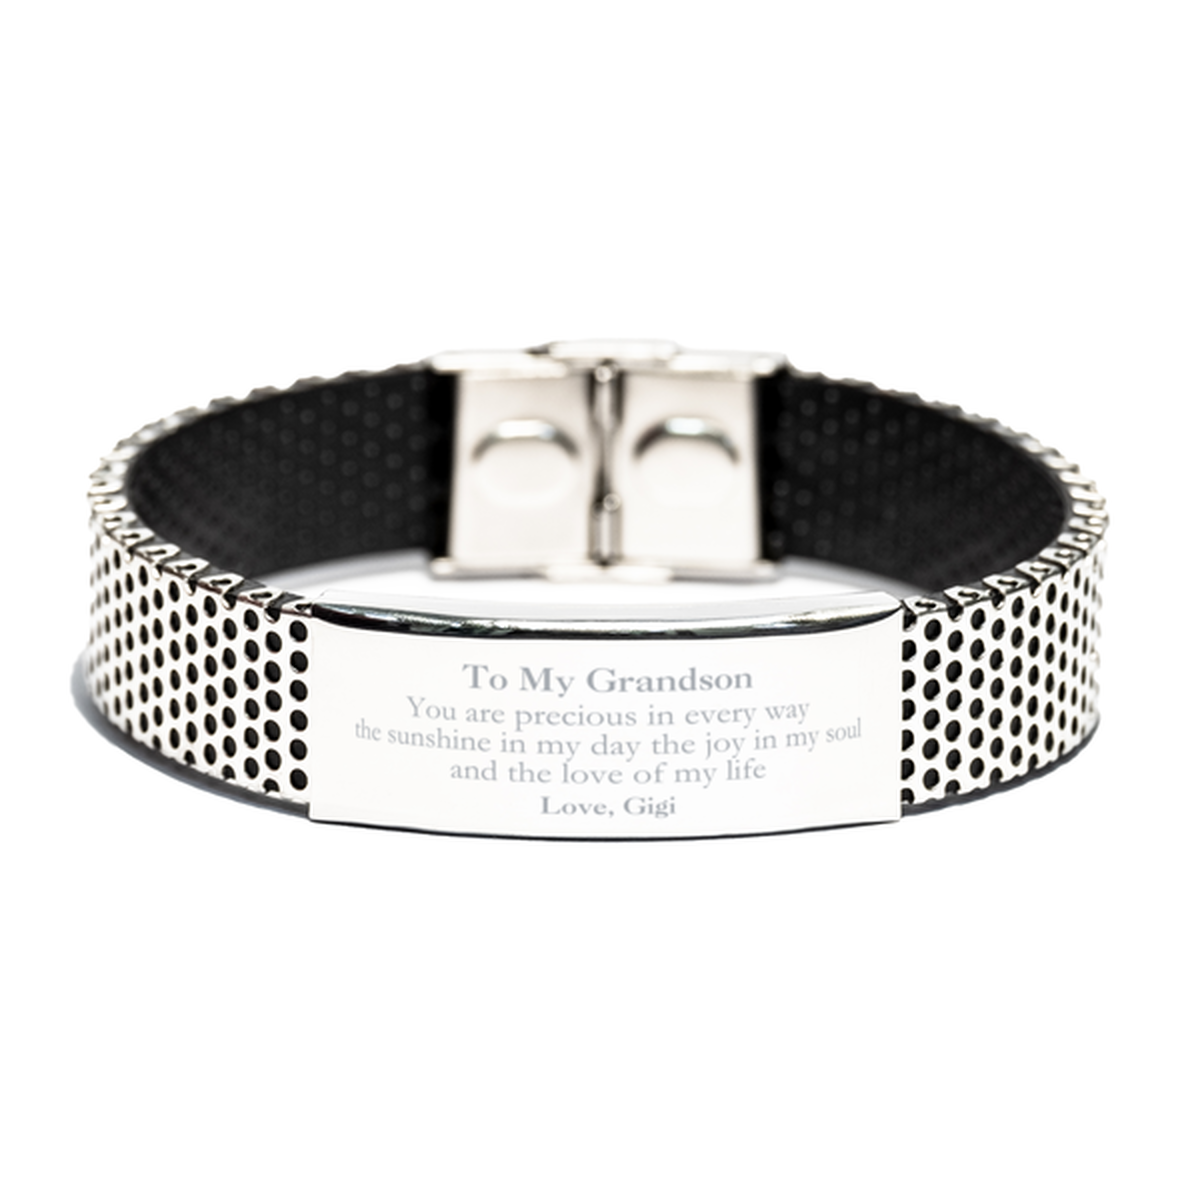 Graduation Gifts for Grandson Stainless Steel Bracelet Present from Gigi, Christmas Grandson Birthday Gifts Grandson You are precious in every way the sunshine in my day. Love, Gigi